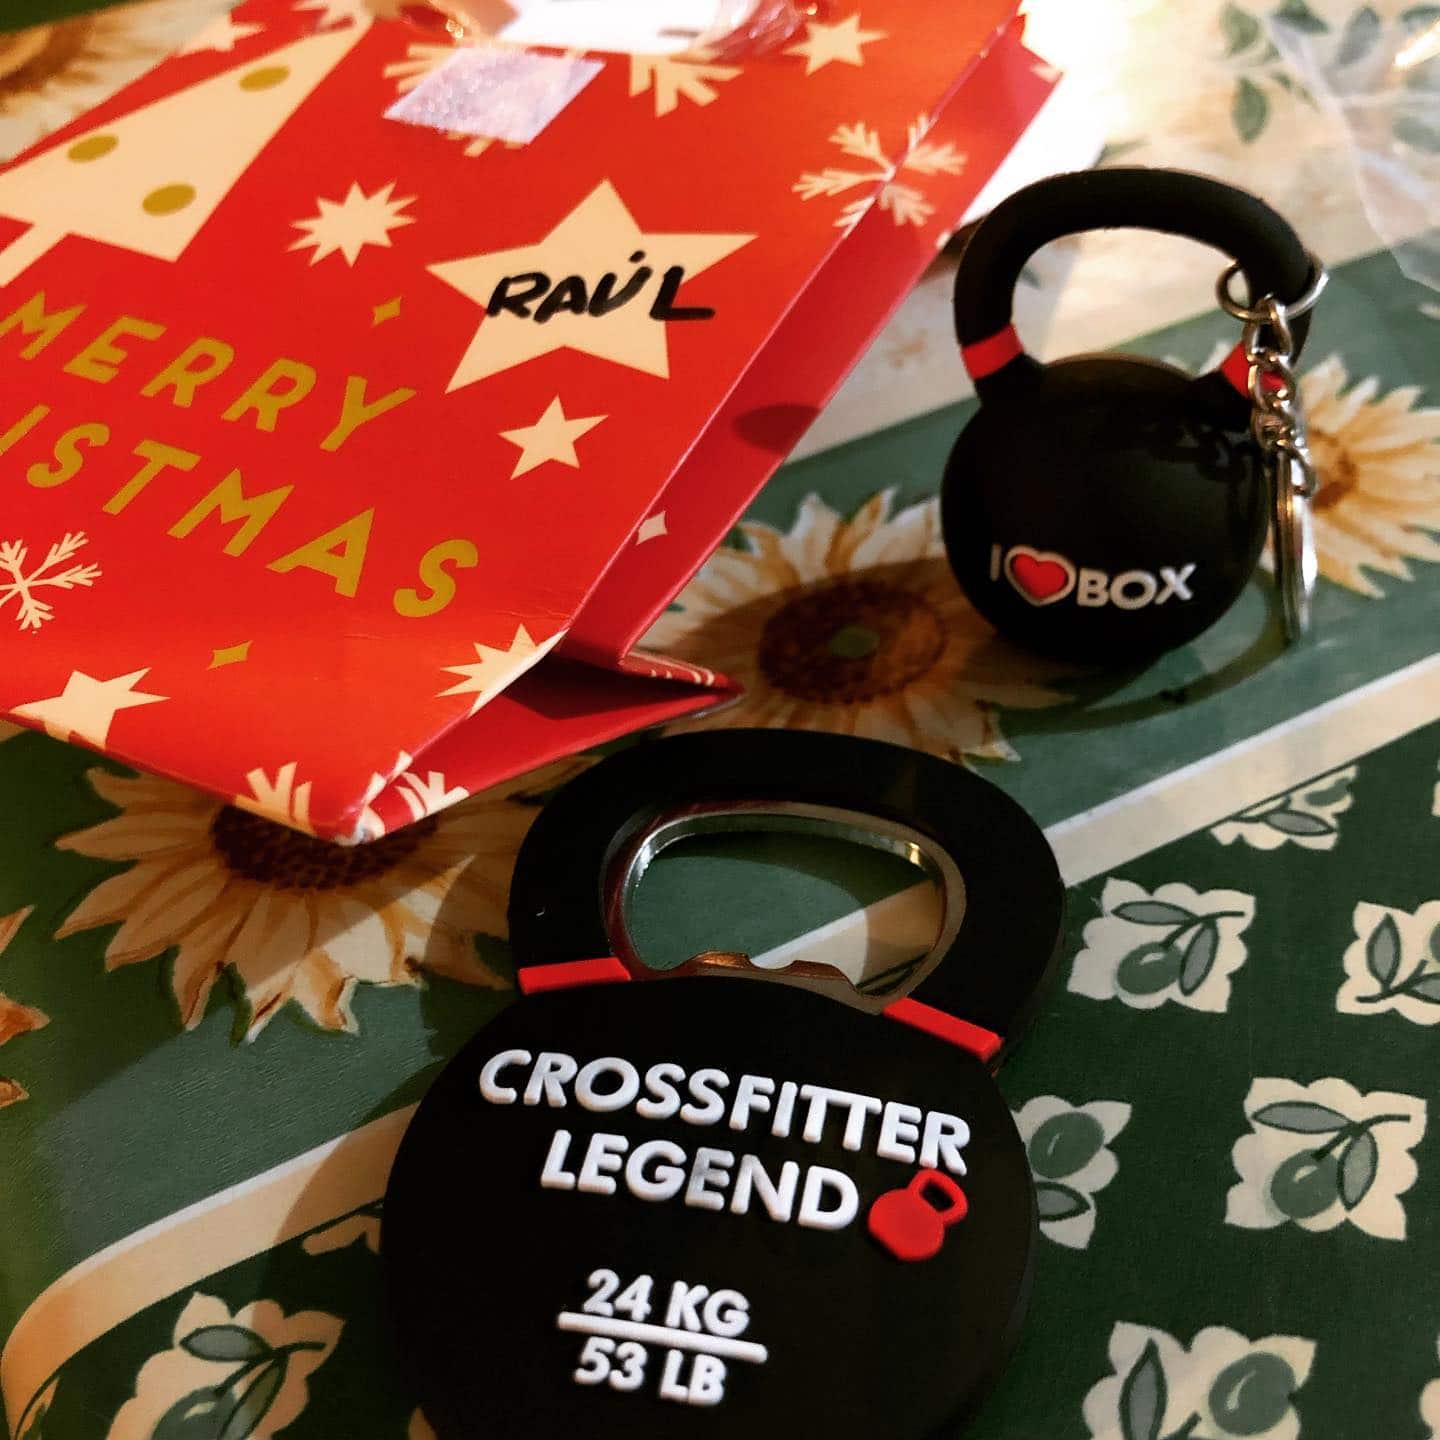 Yeah! I am a CrossFitter Legend! #christmas #crossfit #gift